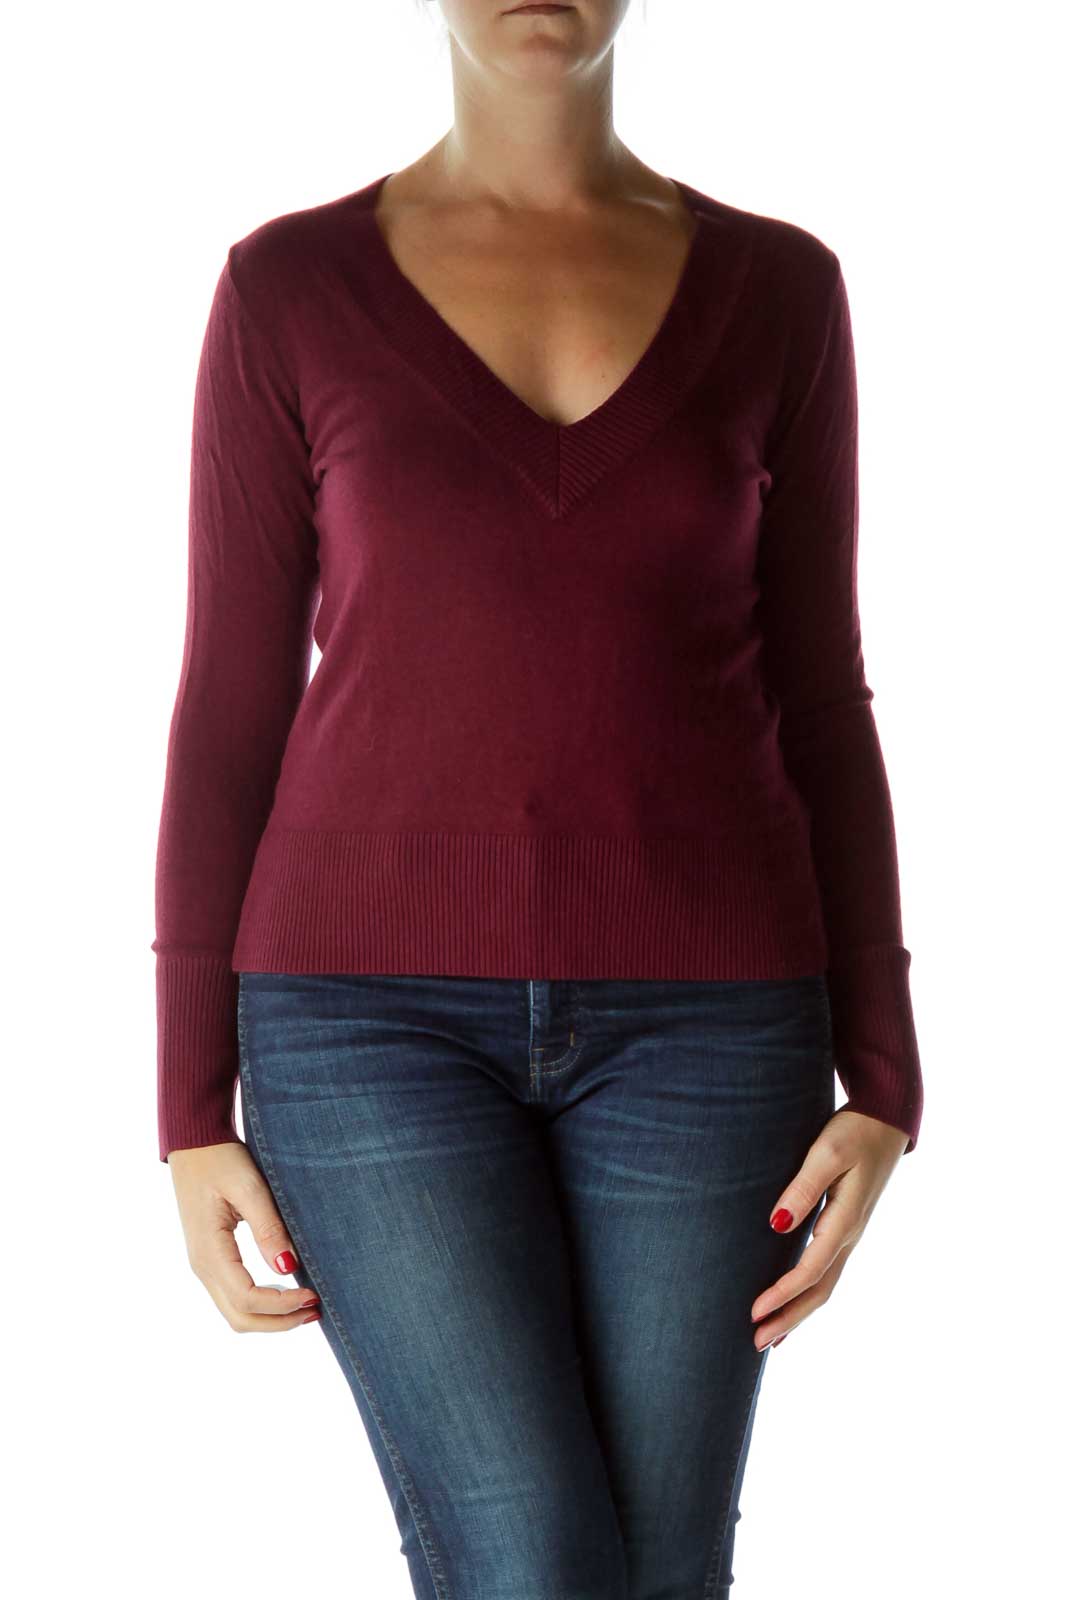 Red V-Neck Casual Top Front